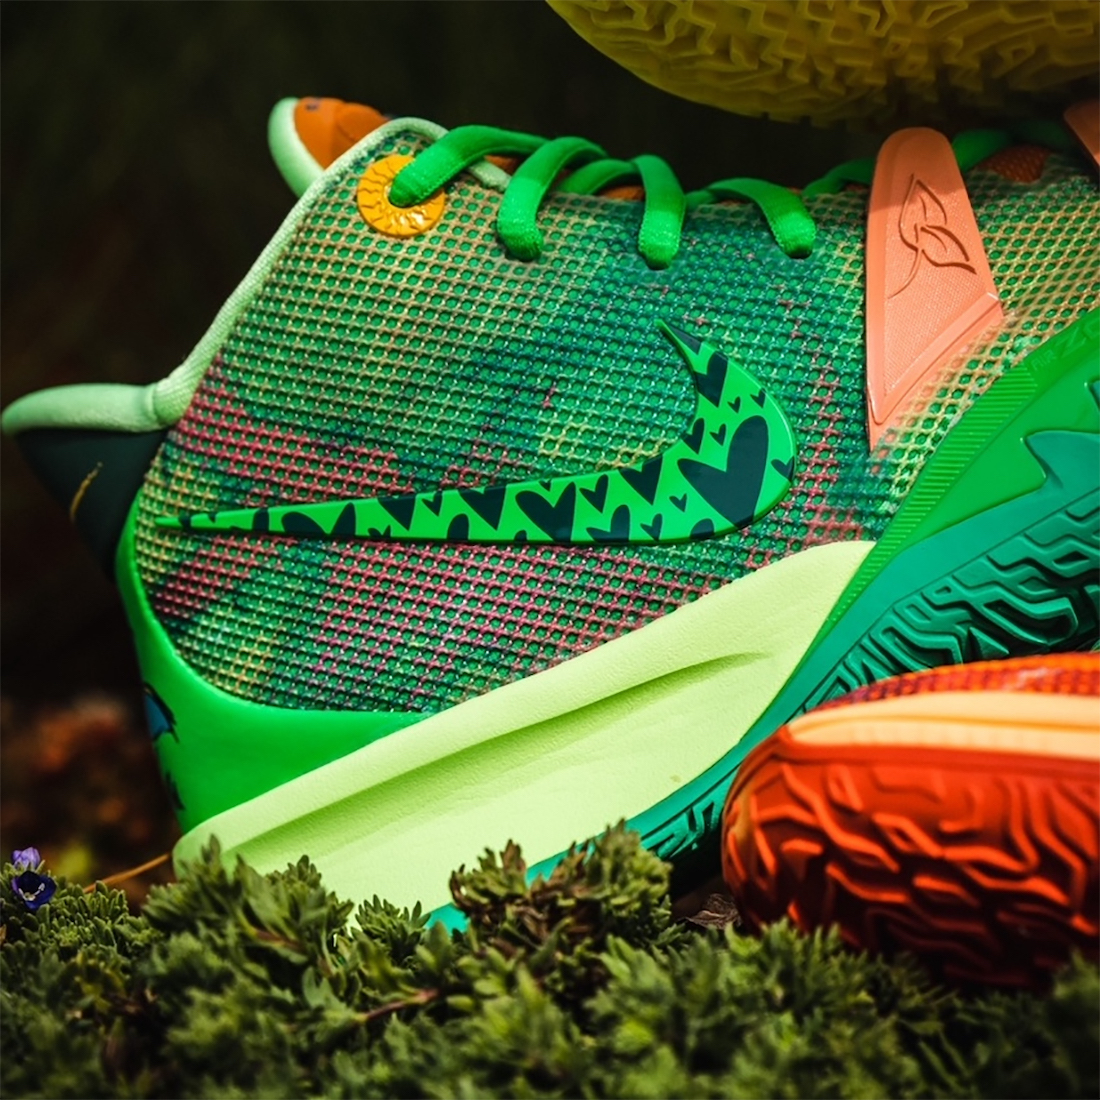 Sneaker Room Nike Kyrie 7 Mother Nature Release Date